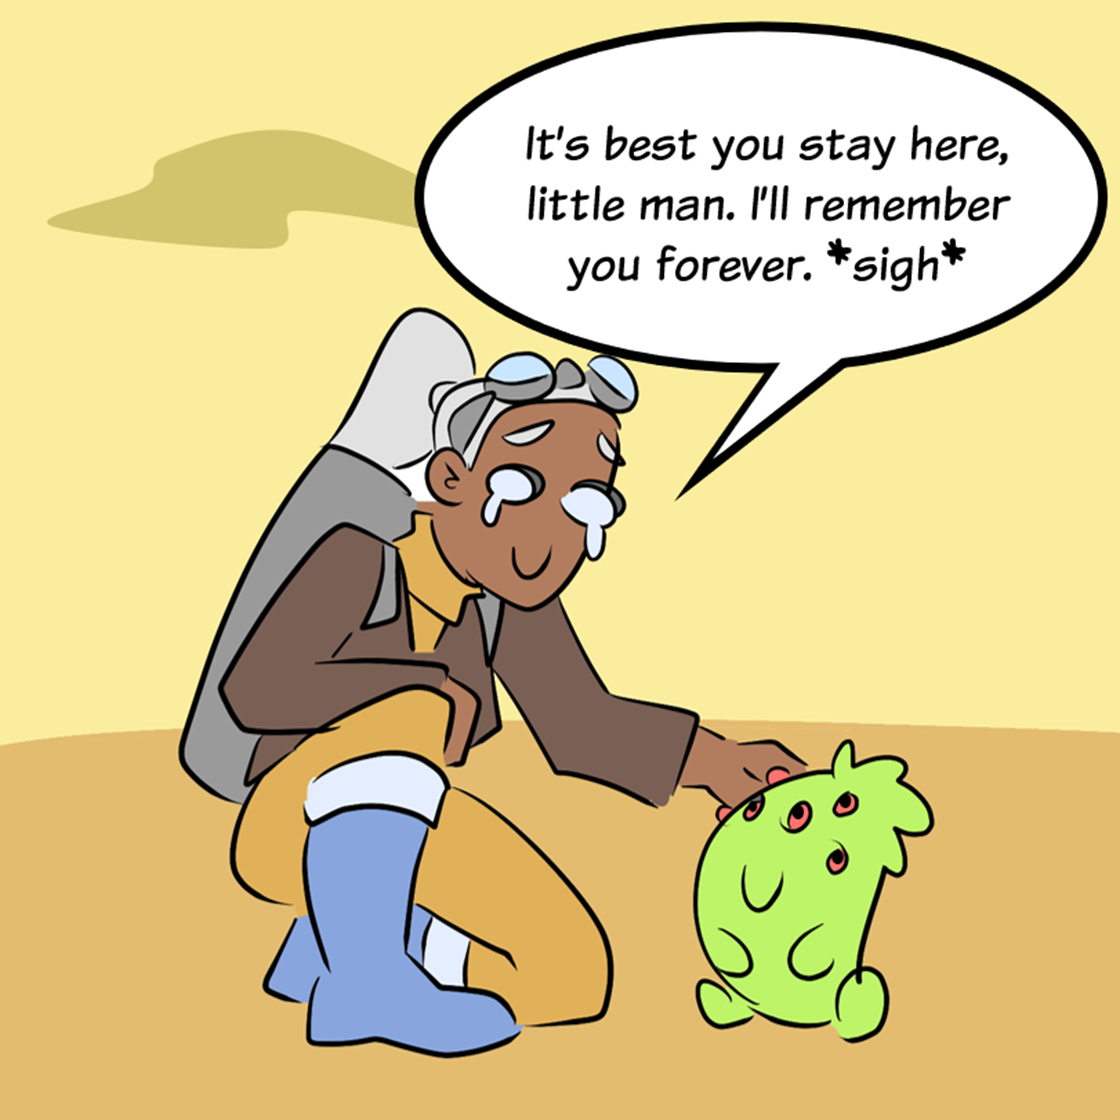 COMIC : THE EXTERMINATOR AND THE CELESTIAL INFANT – PART 4 OF 4